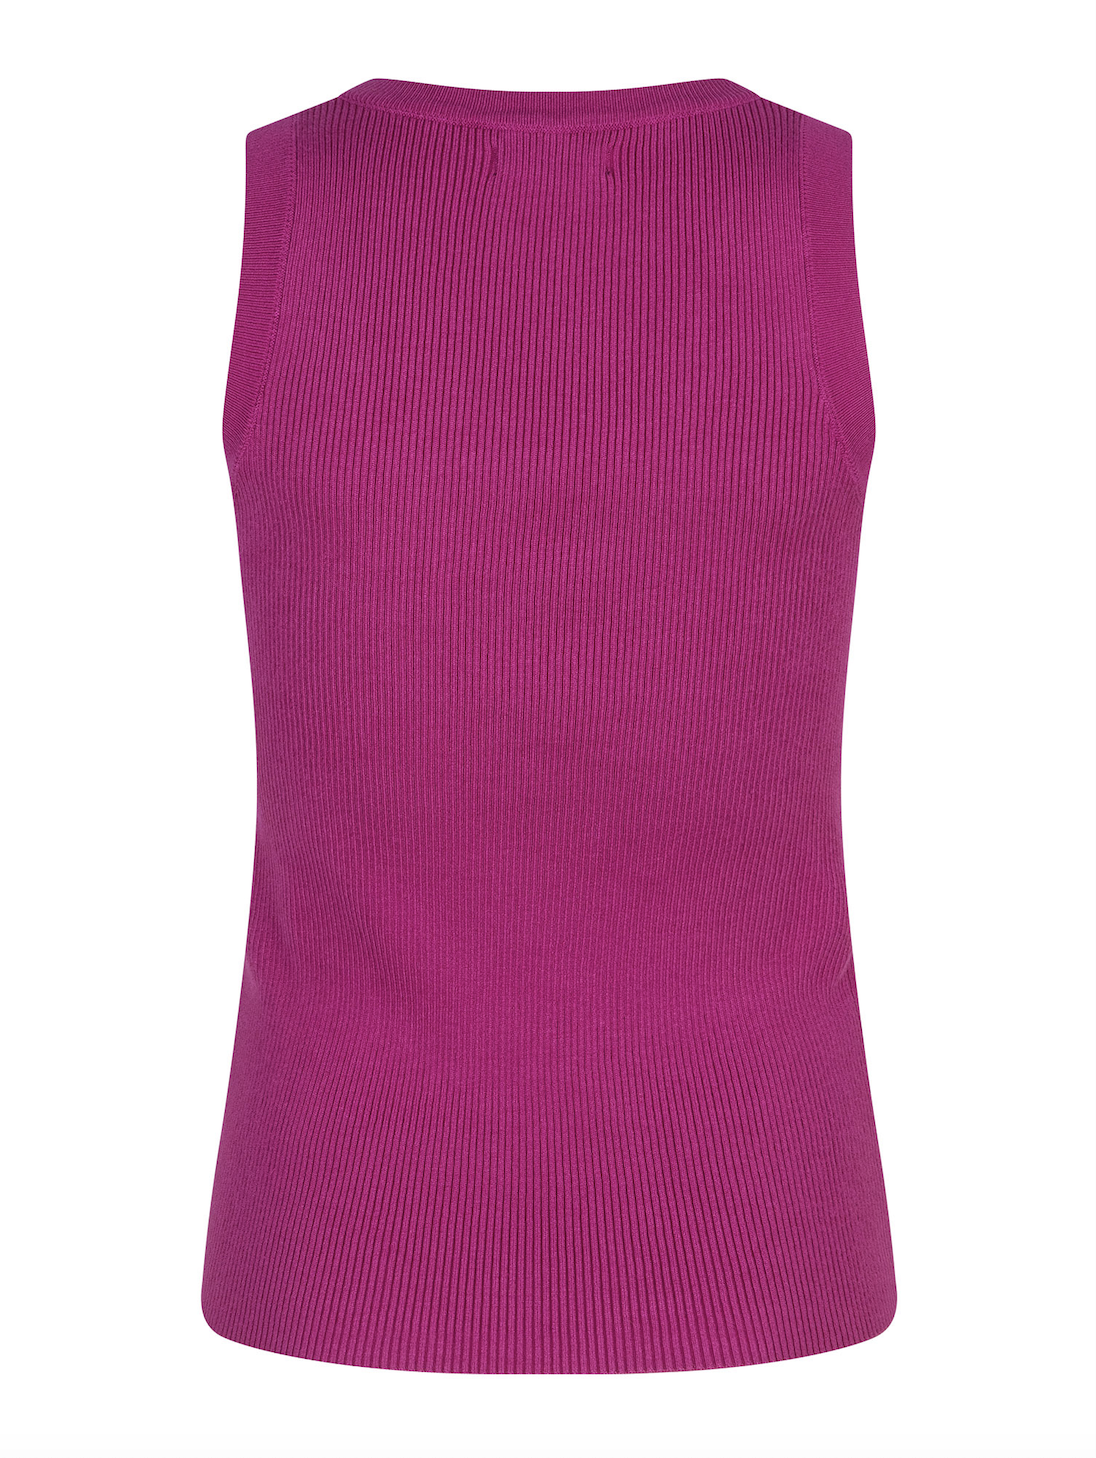 YDENCE YDENCE - Knitted top Keely purple